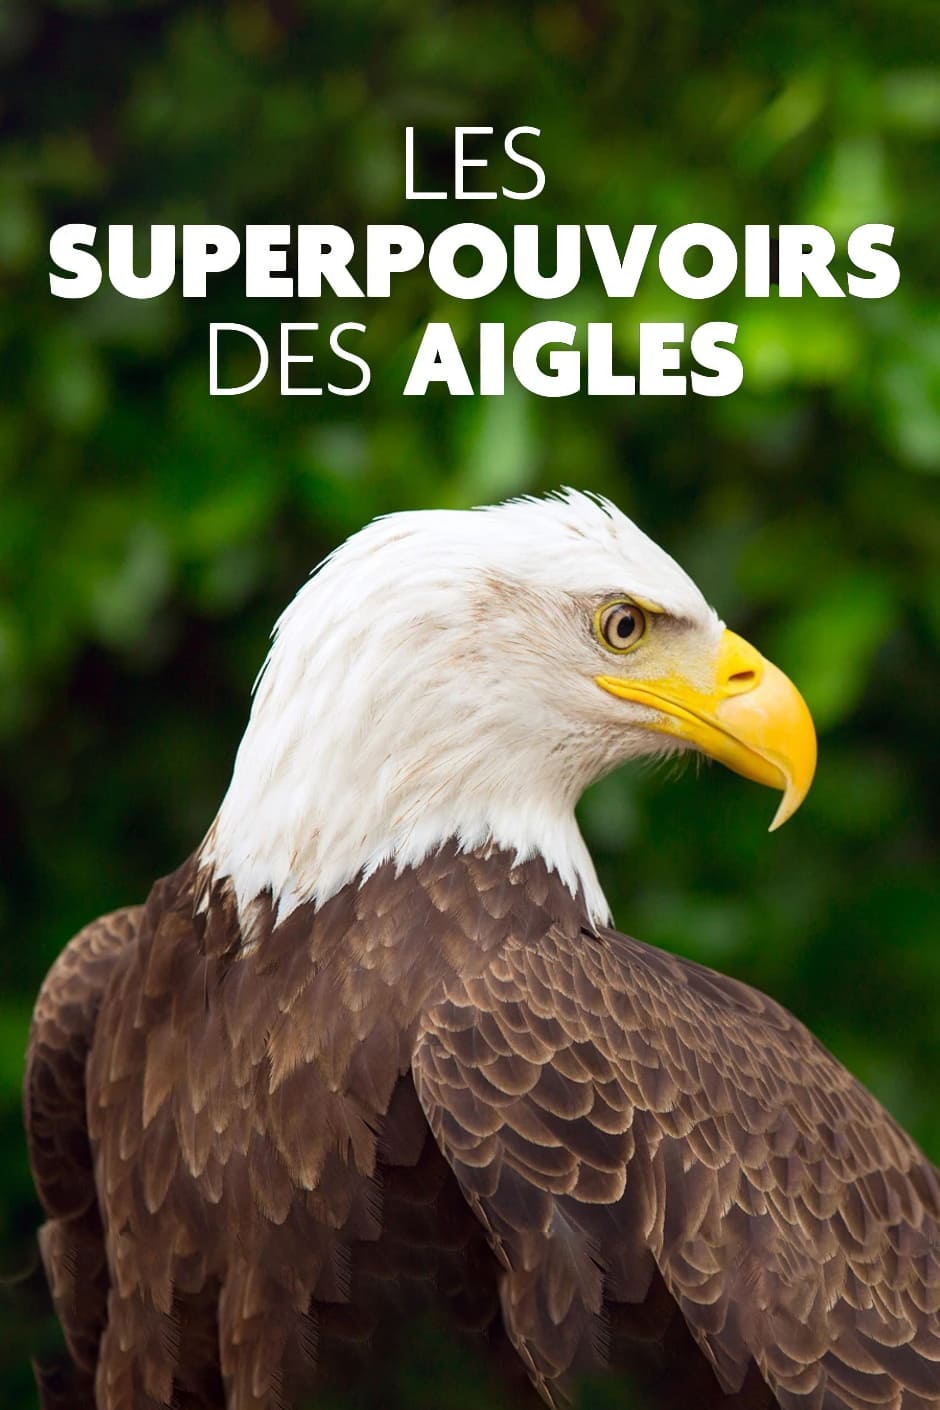 Superpowered Eagles